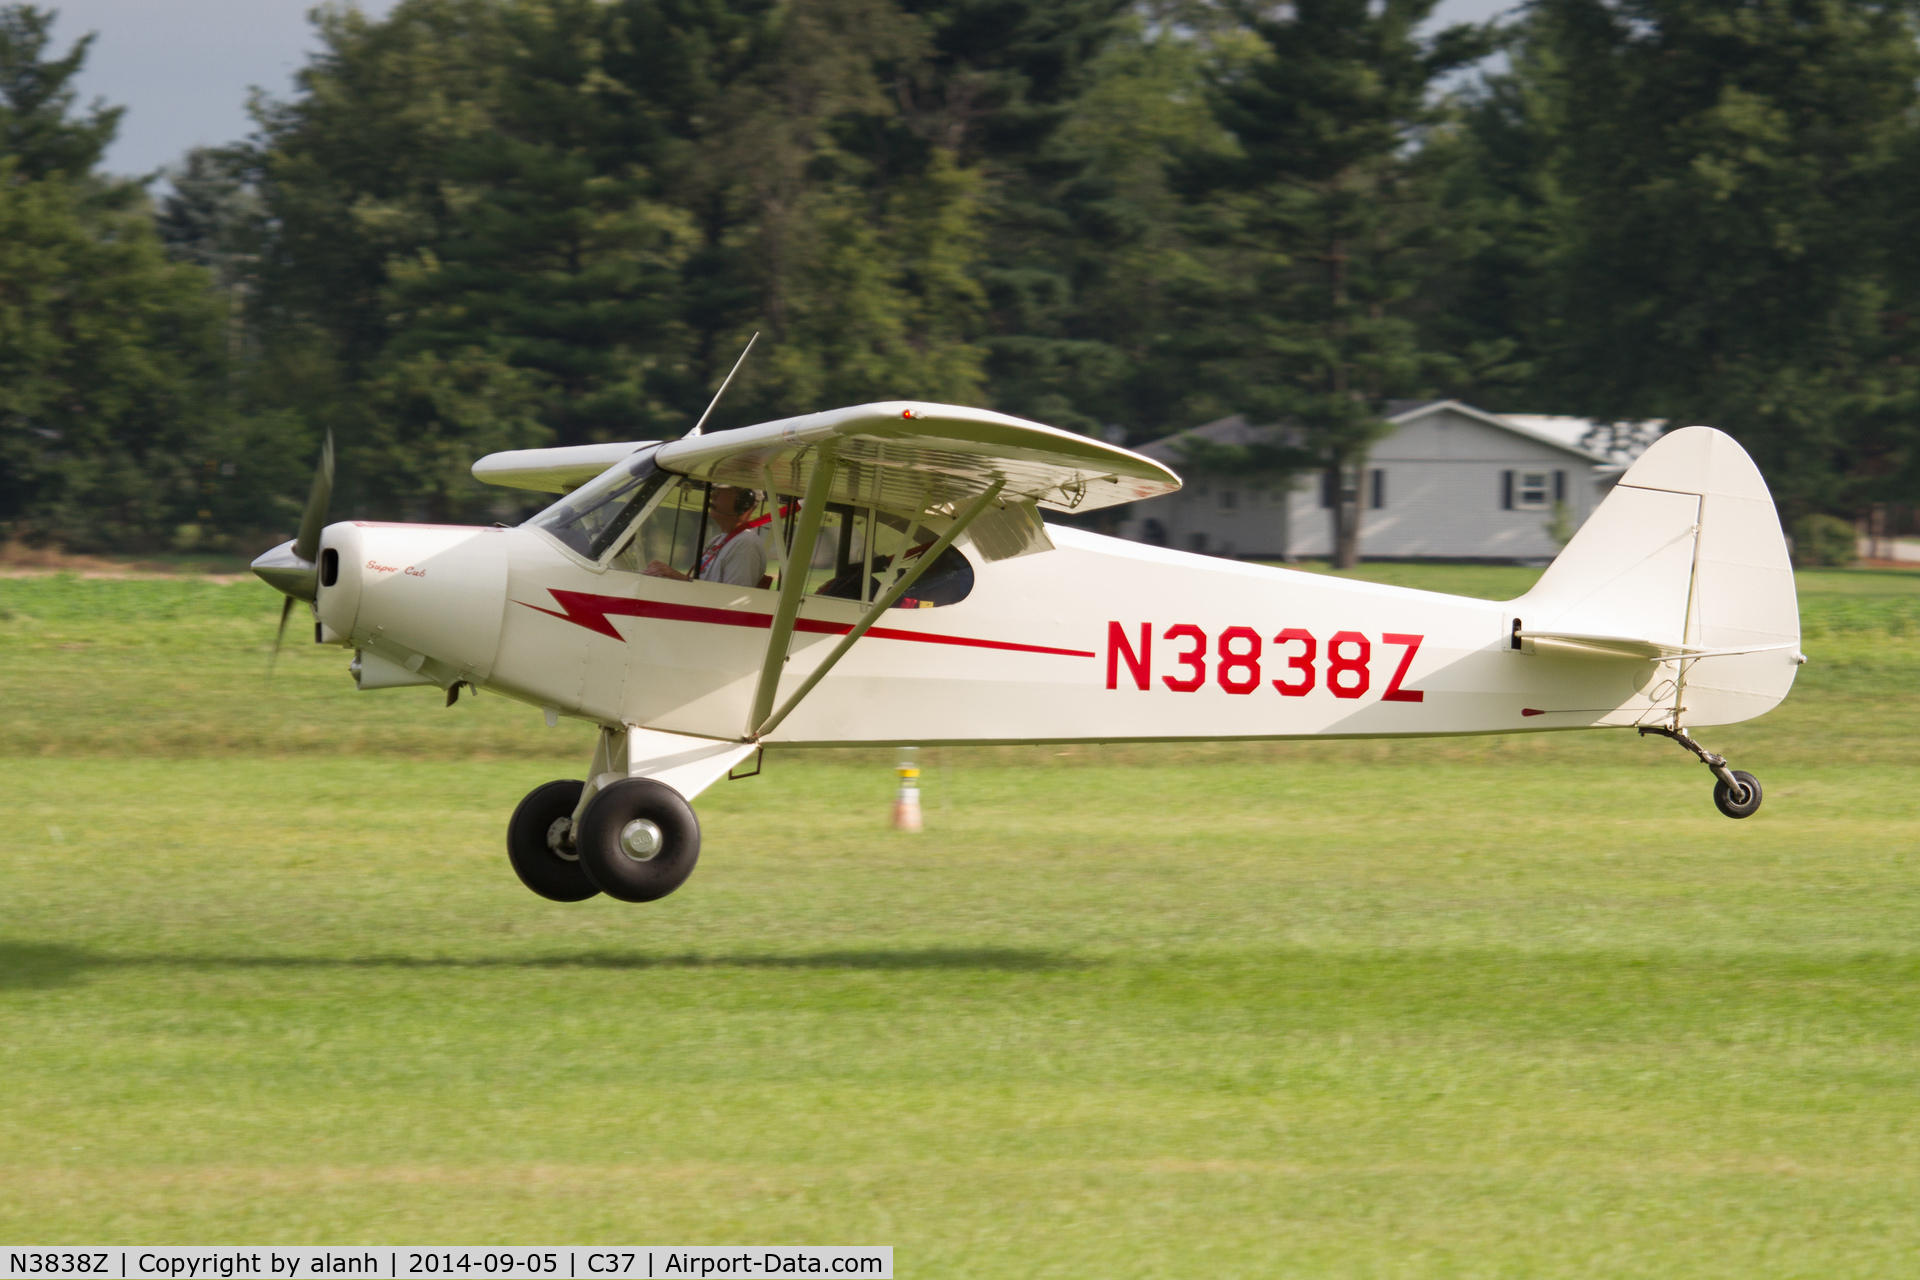 N3838Z, 1960 Piper PA-18-150 Super Cub C/N 18-7592, Arriving at the 2014 Grassroots fly-in